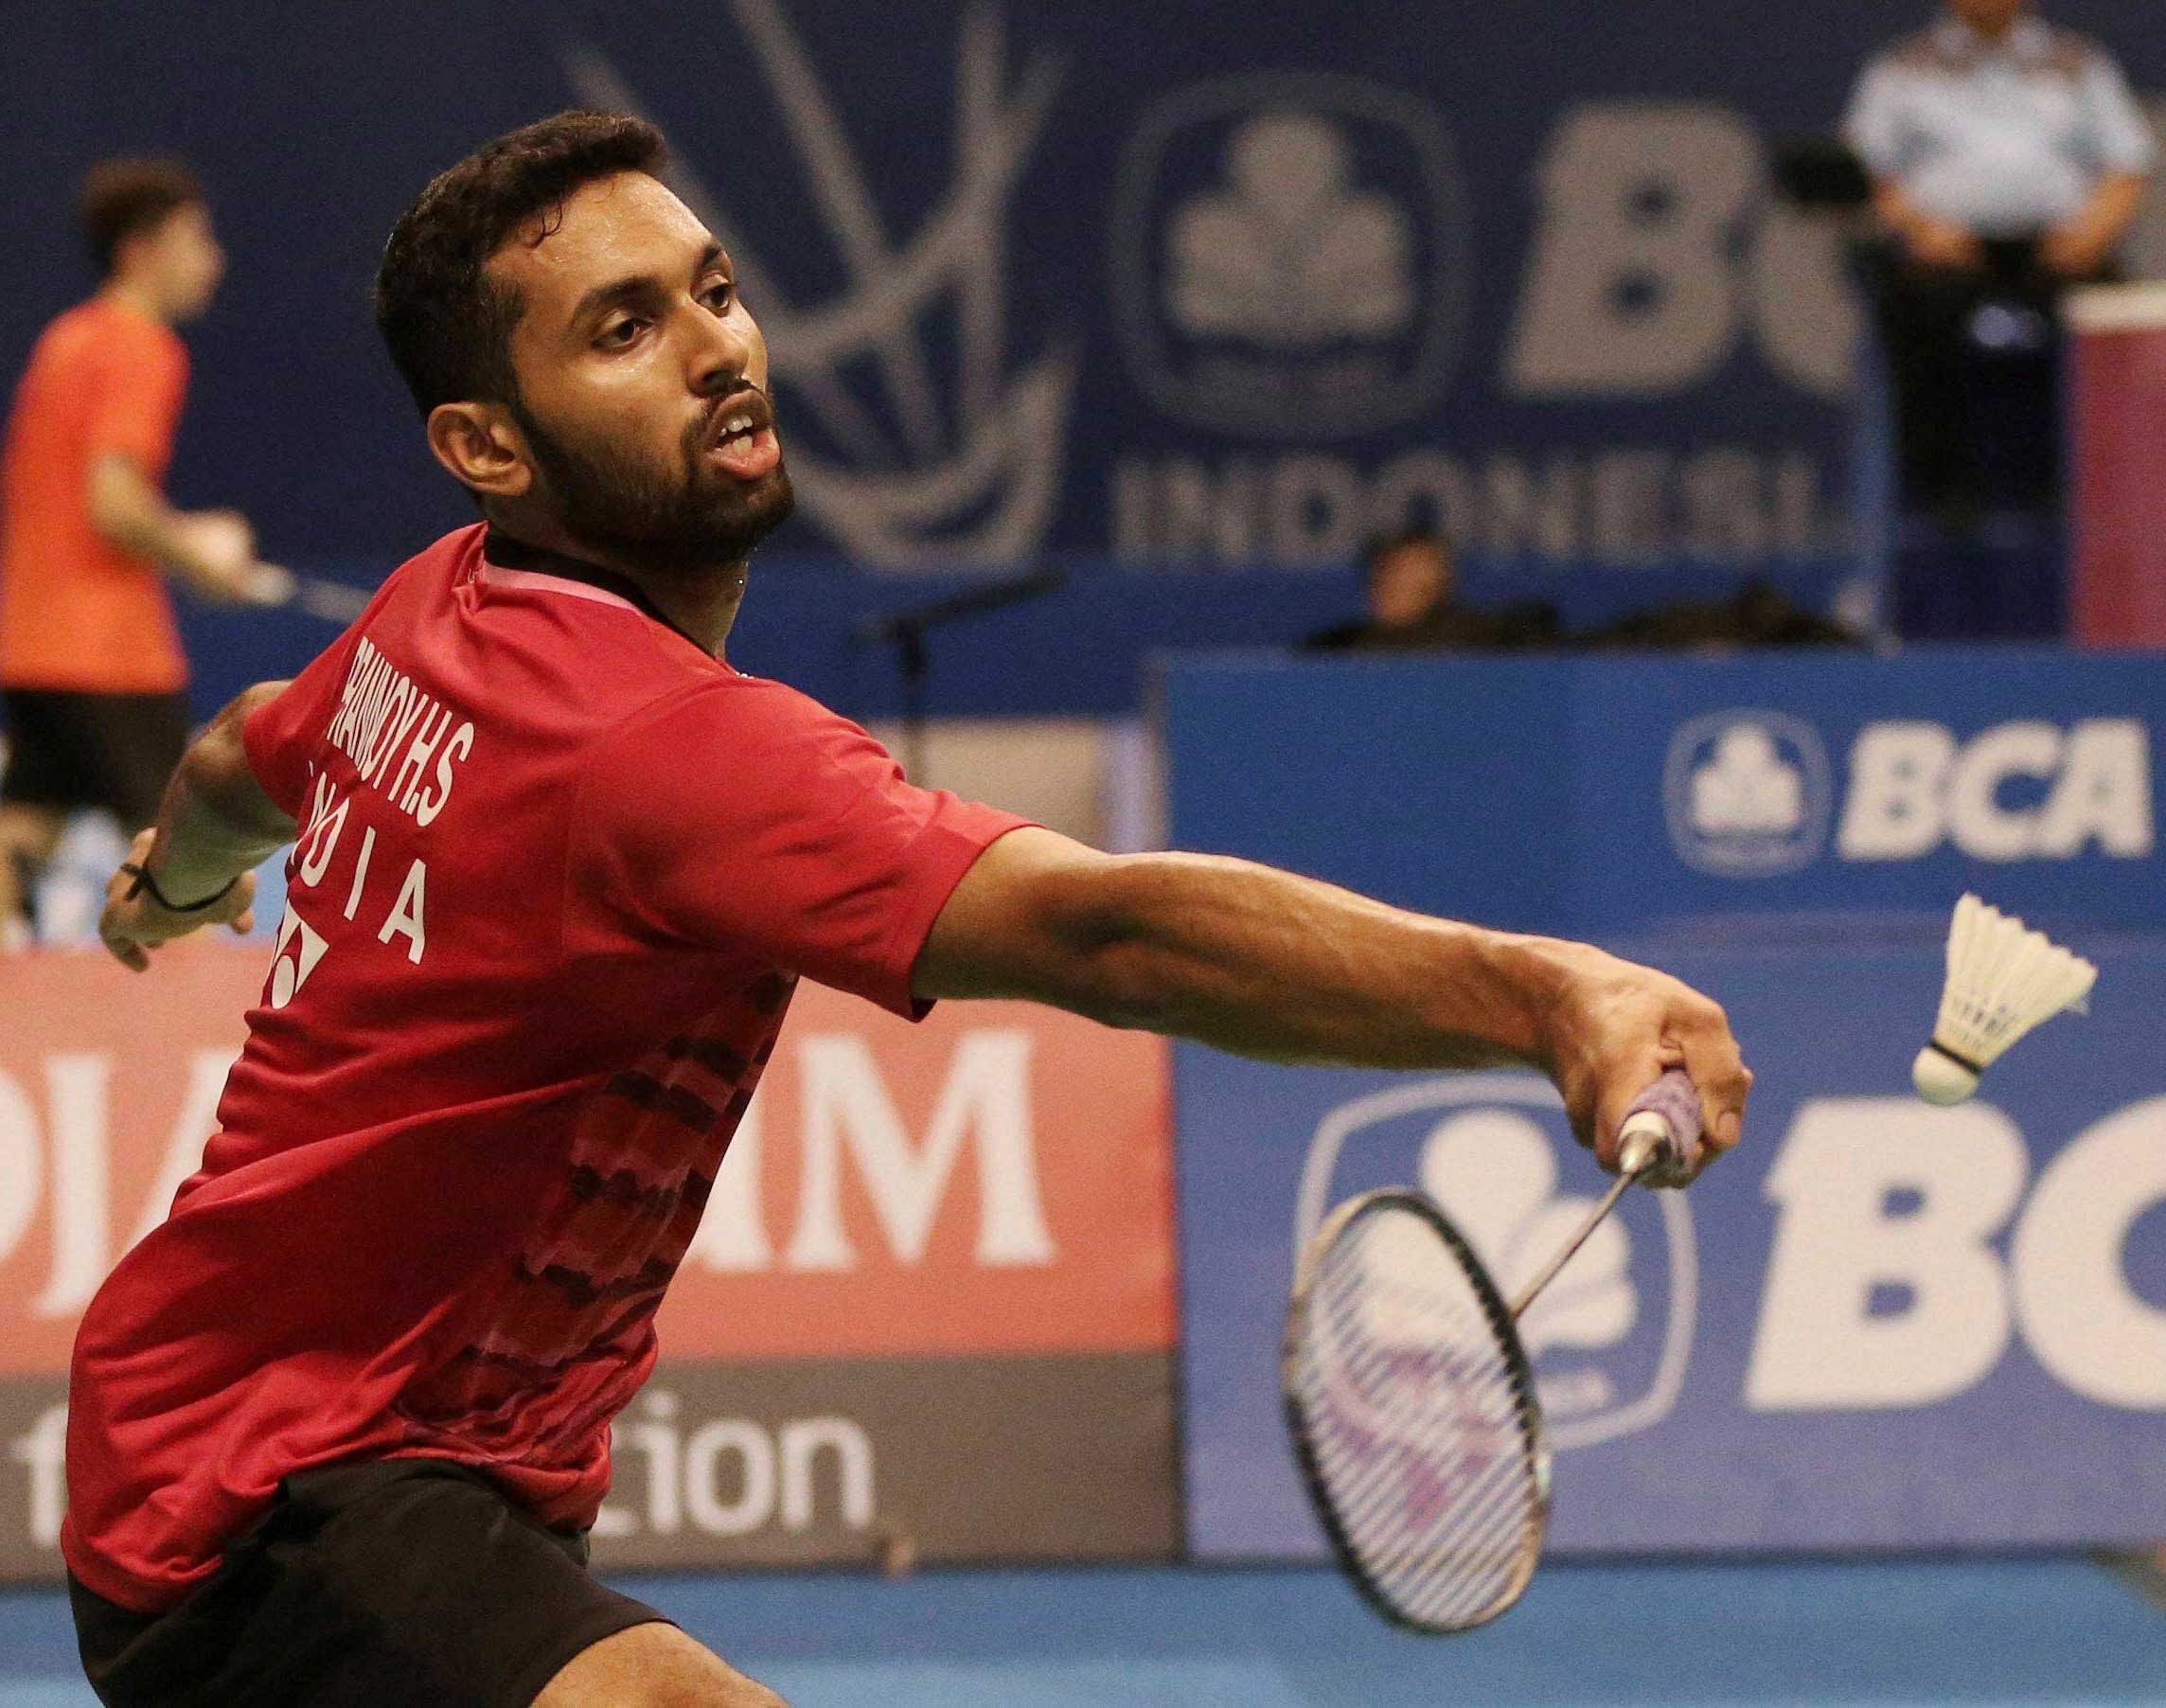 US Open champion Prannoy will next face Korea's top seed Son Wan Ho, Srikanth will meet current world champion Viktor Axelsen, while Saina will square off against Japan's Akane Yamaguchi. AP, PTI file photo